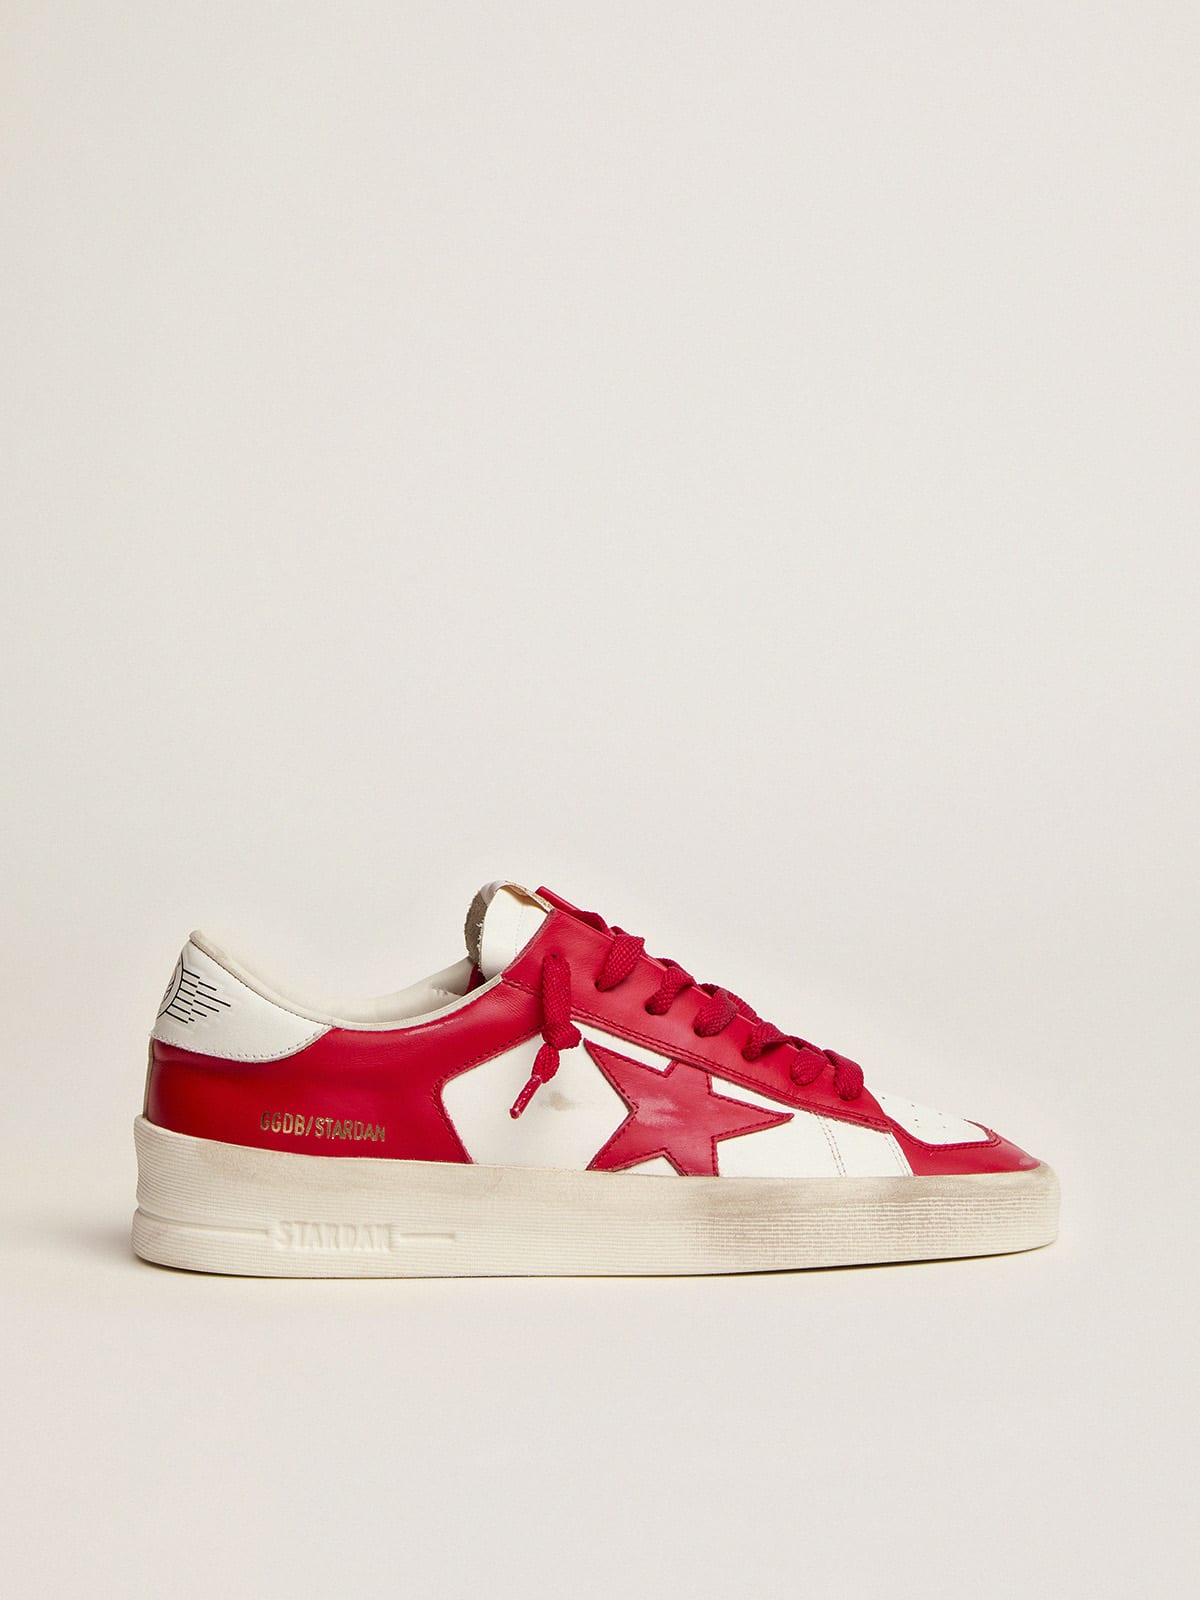 Men's Stardan sneakers in red and white leather